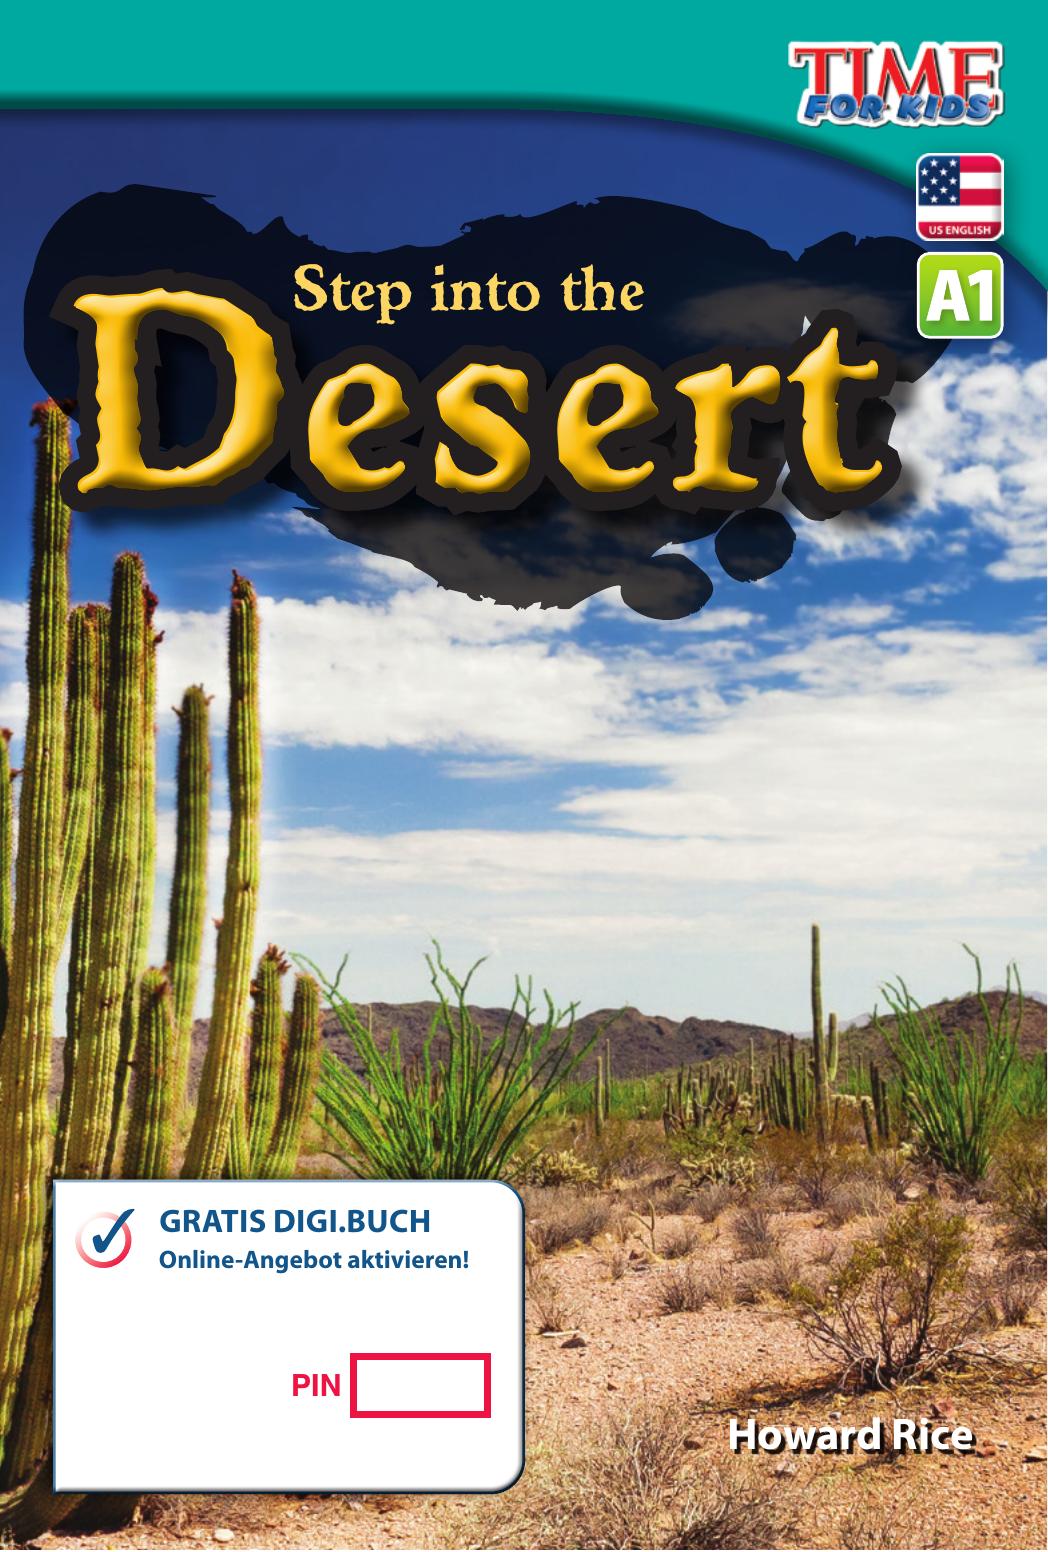 A1 – Step into the Desert